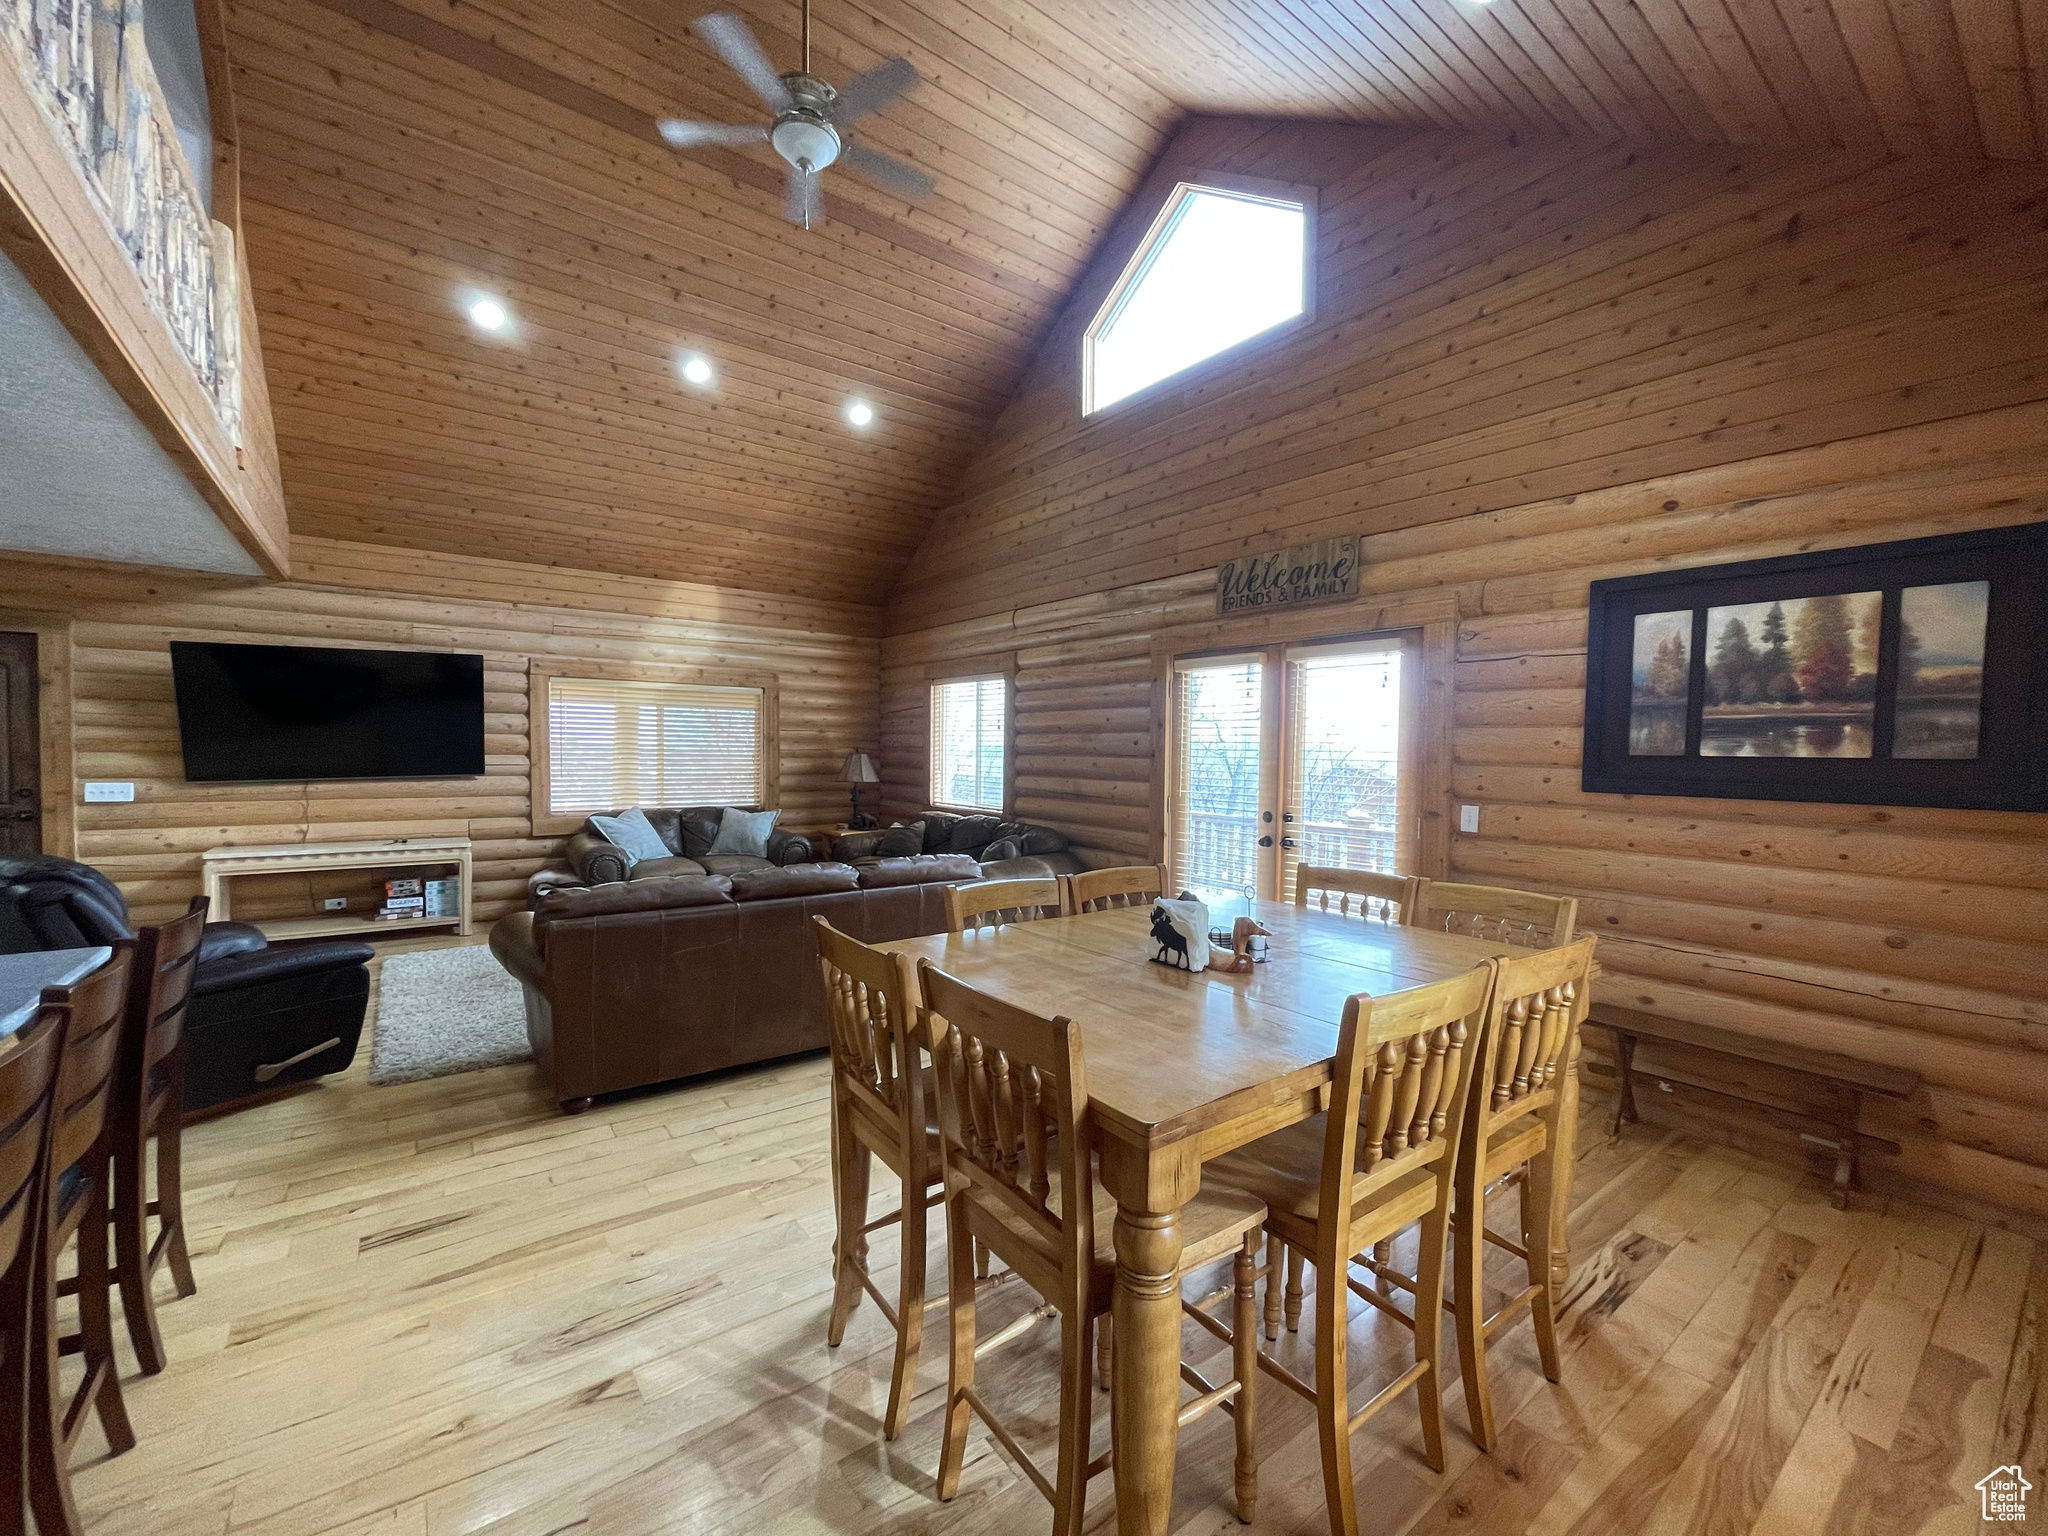 Dining space with light wood-type flooring, high vaulted ceiling, wooden ceiling, and ceiling fan